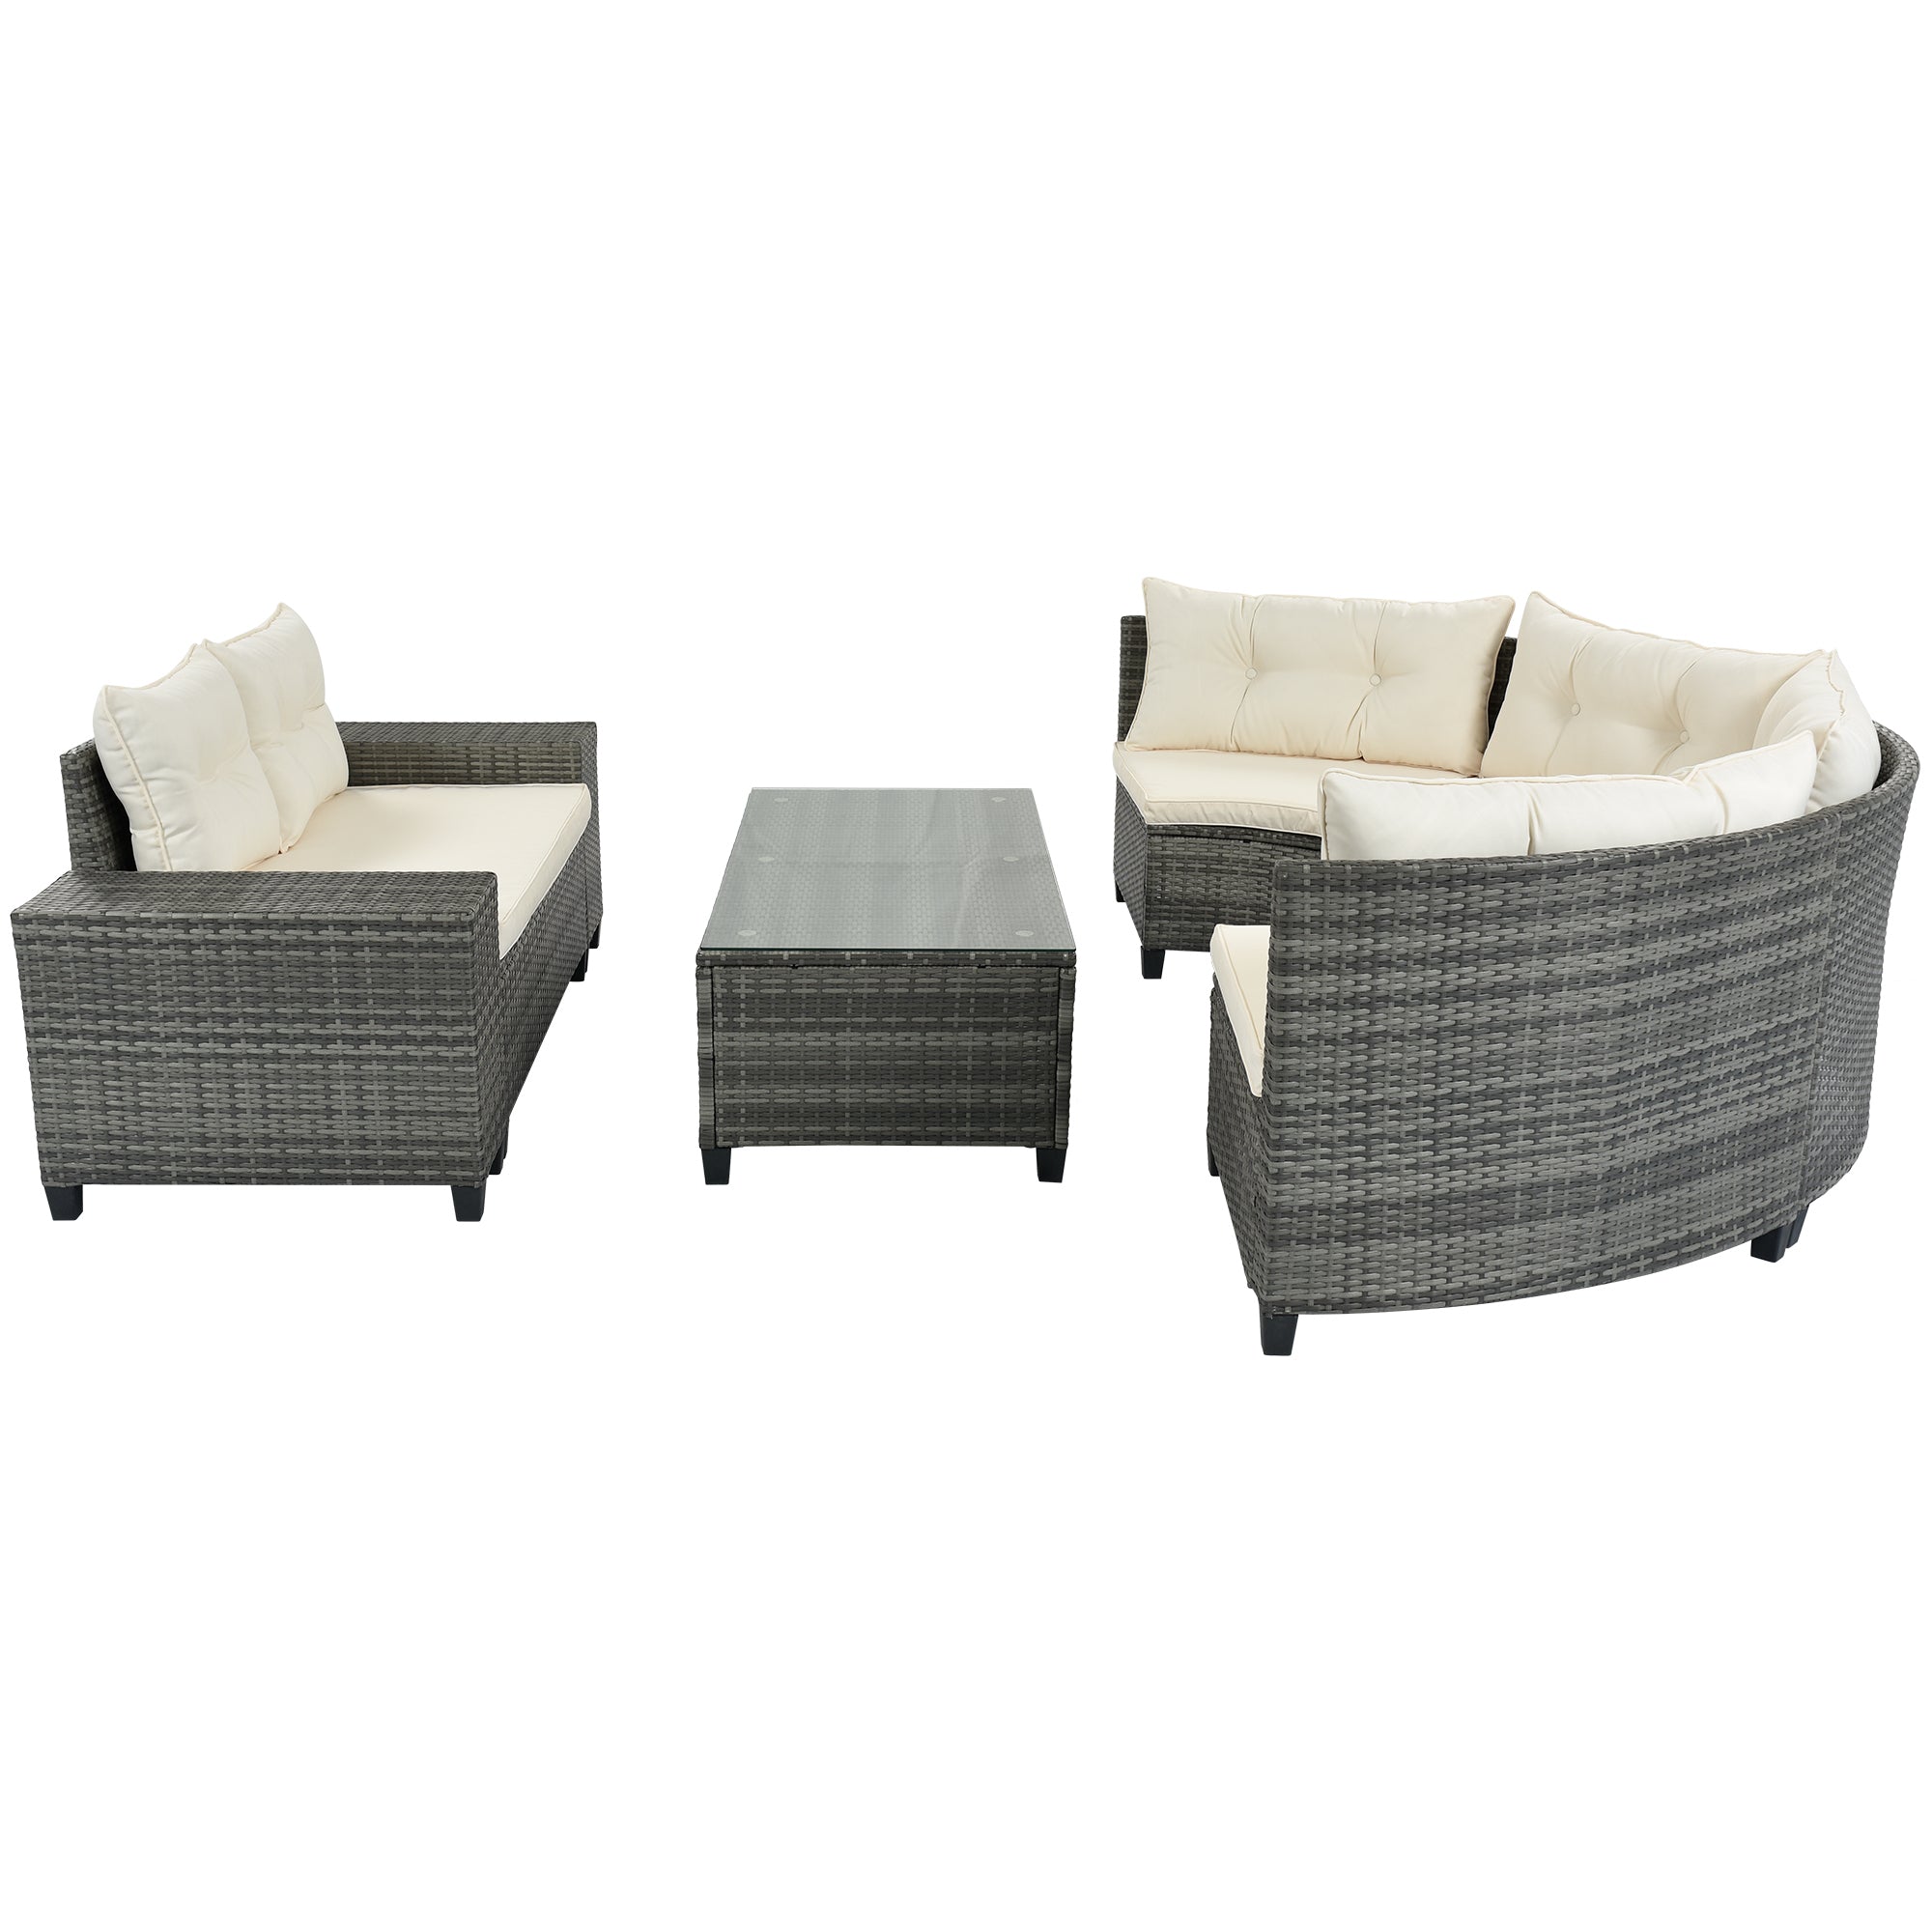 8-pieces Outdoor Wicker Round Sofa Set, Half-Moon Sectional Sets With Rectangular Coffee Table, Movable Cushion, Beige